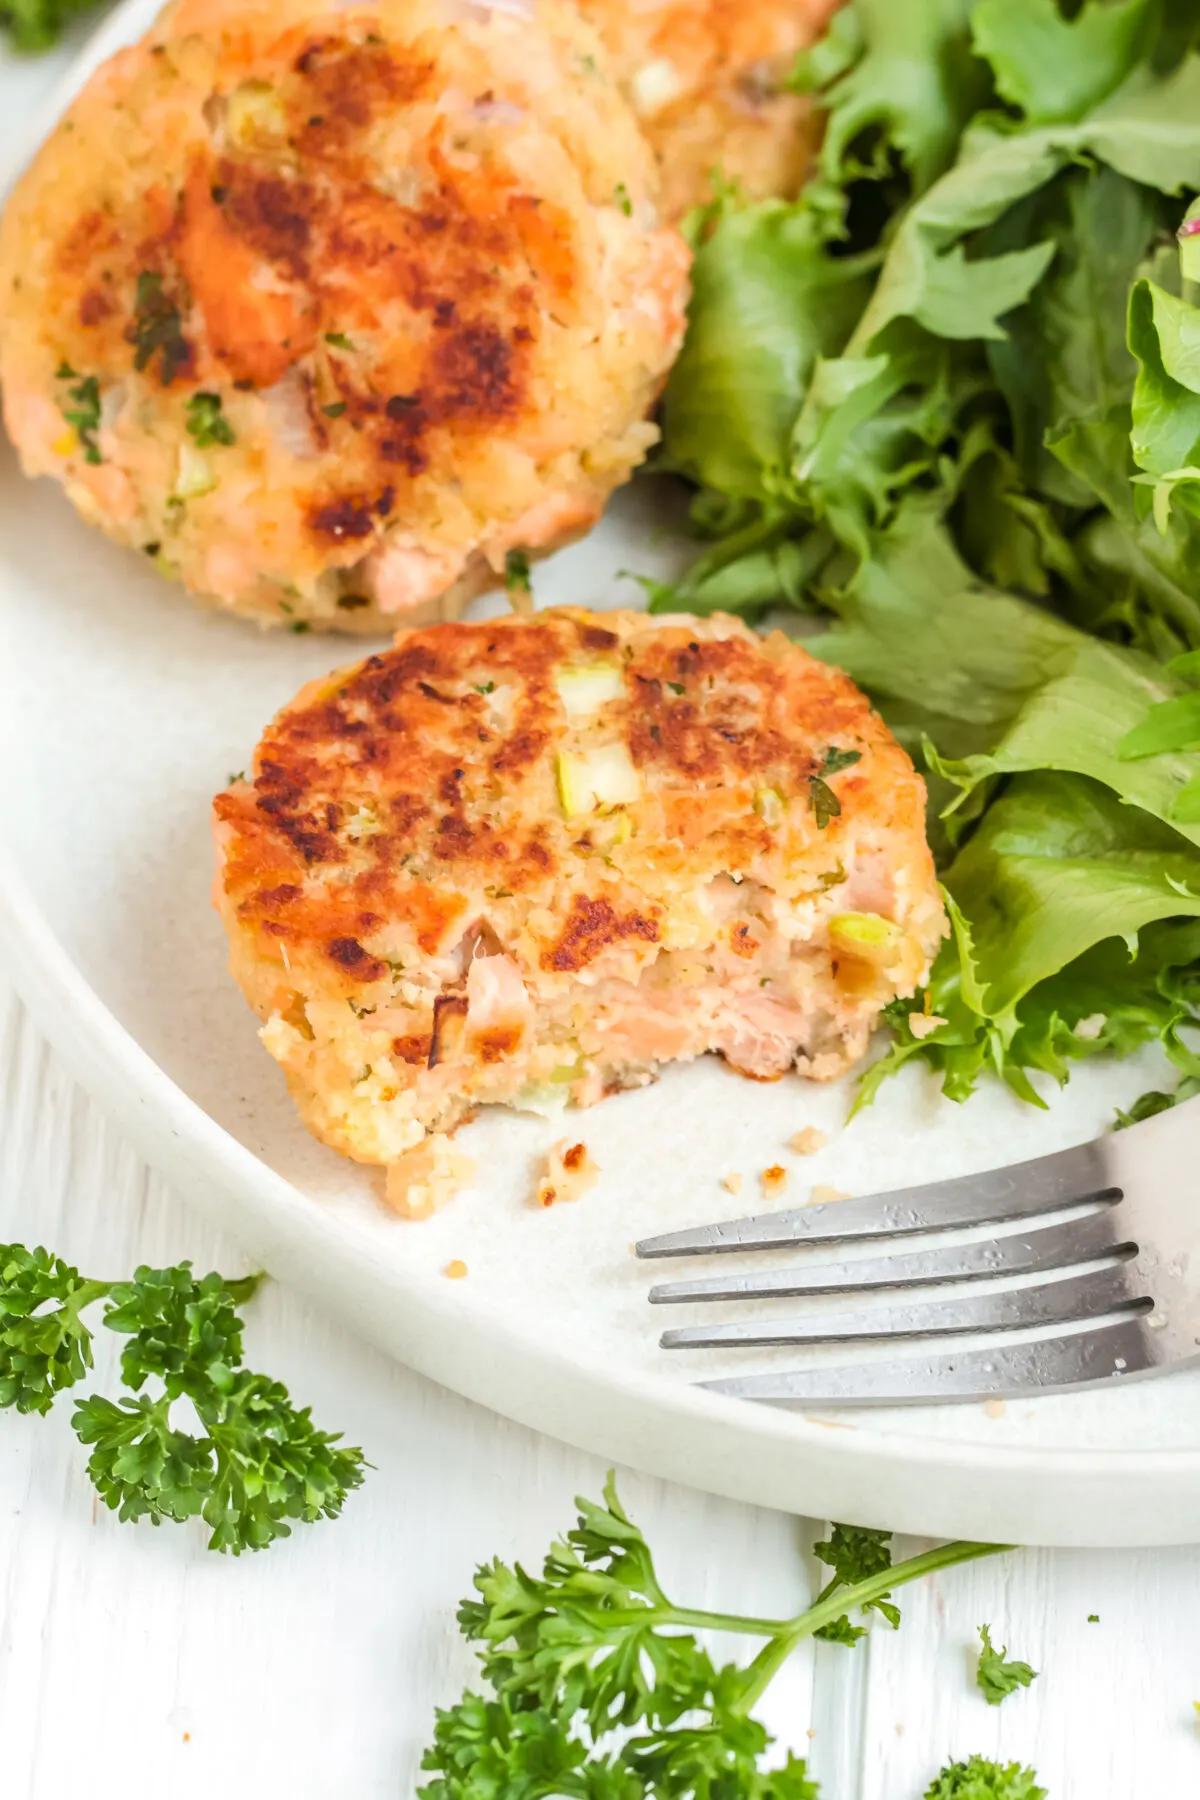 Looking for an easy fresh salmon cakes recipe? These fish patties are fresh, simple, and delicious - perfect for a quick weeknight meal!